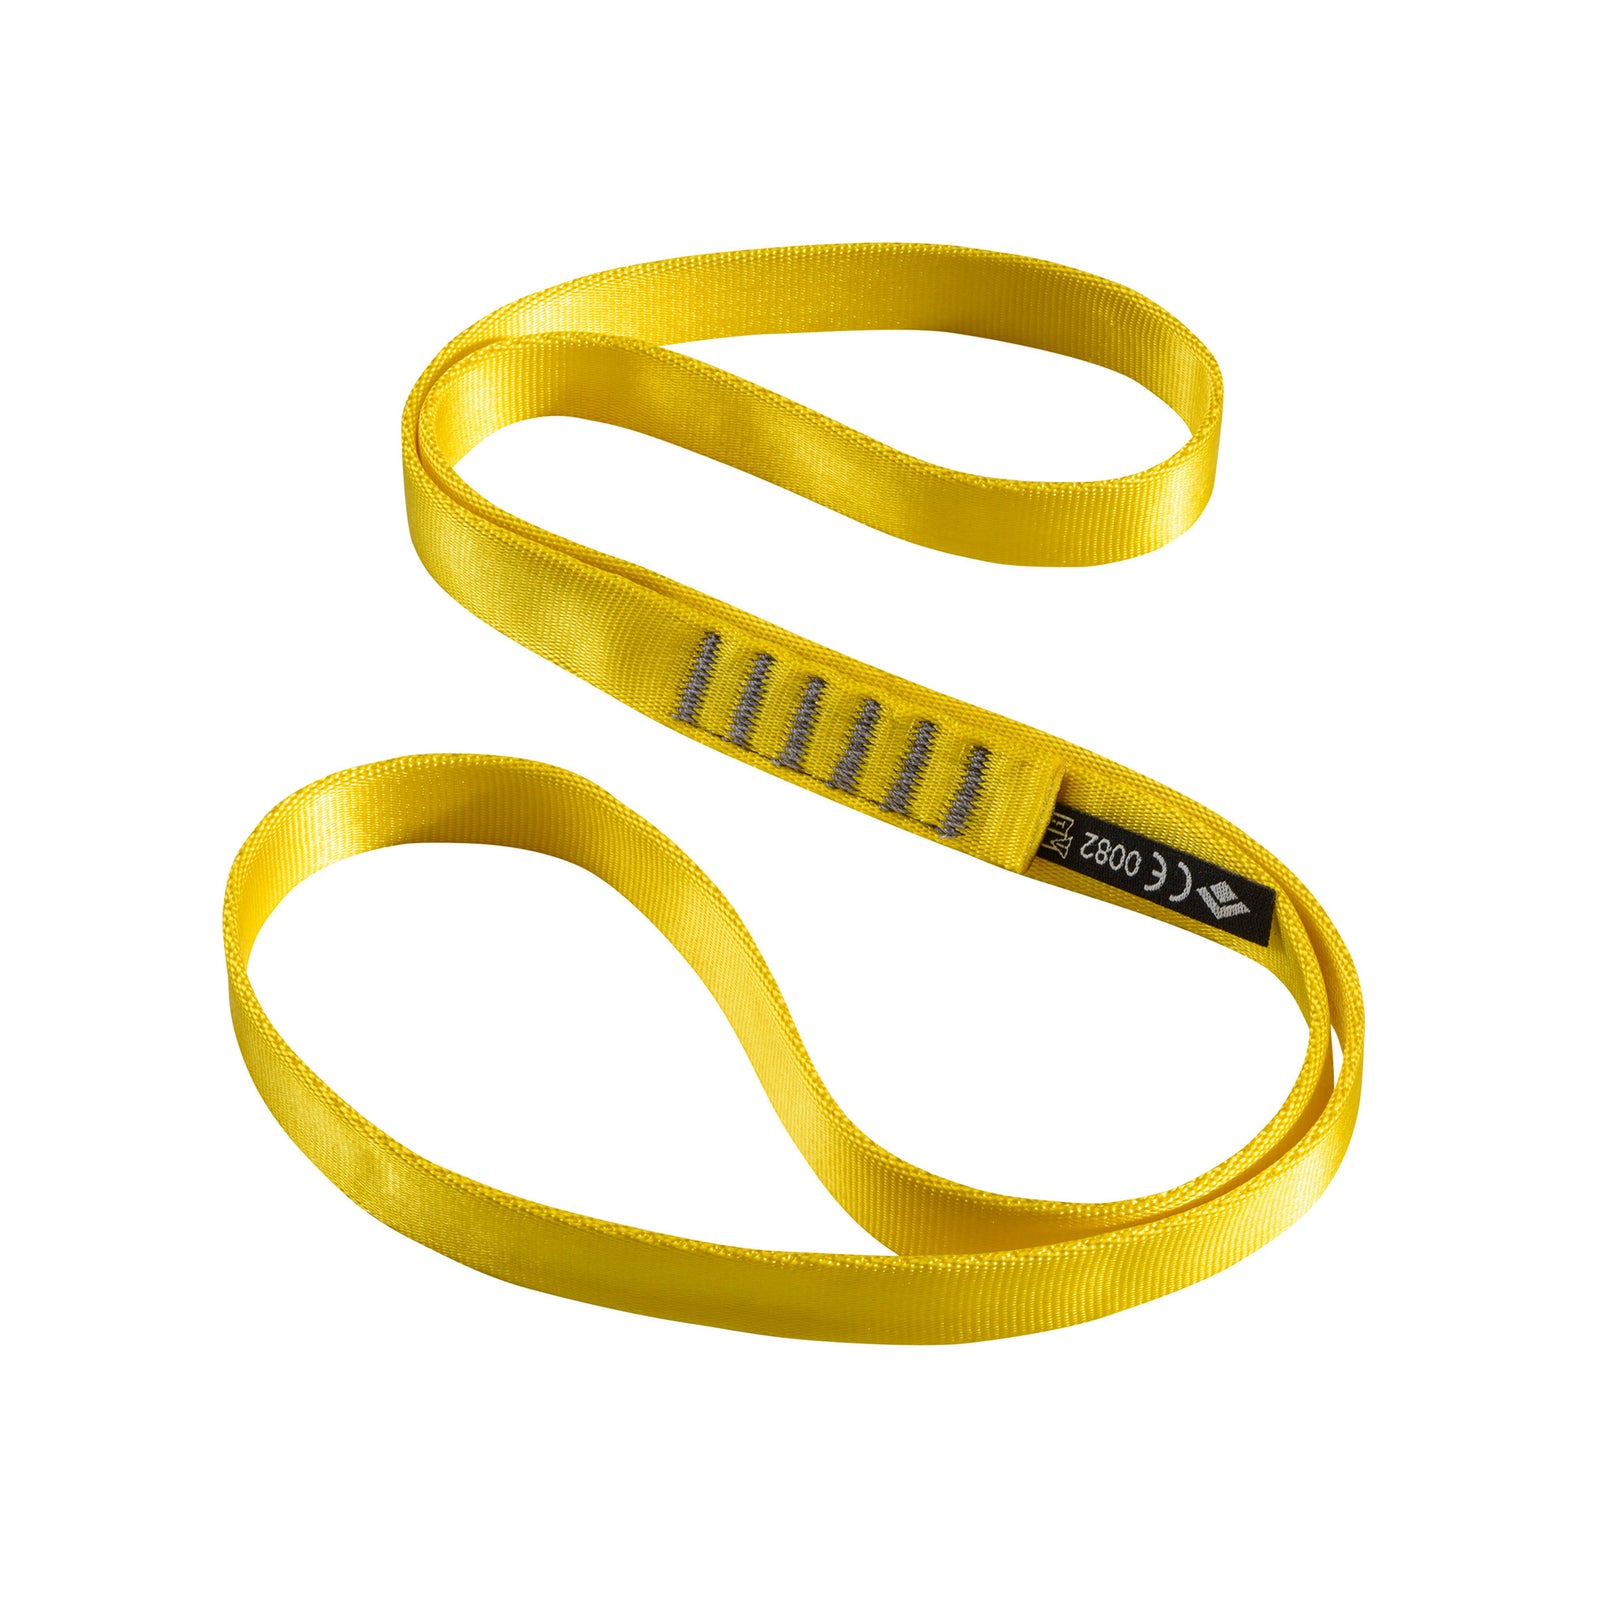 a photo of a black diamond nylon runner in the 60 cm yellow size